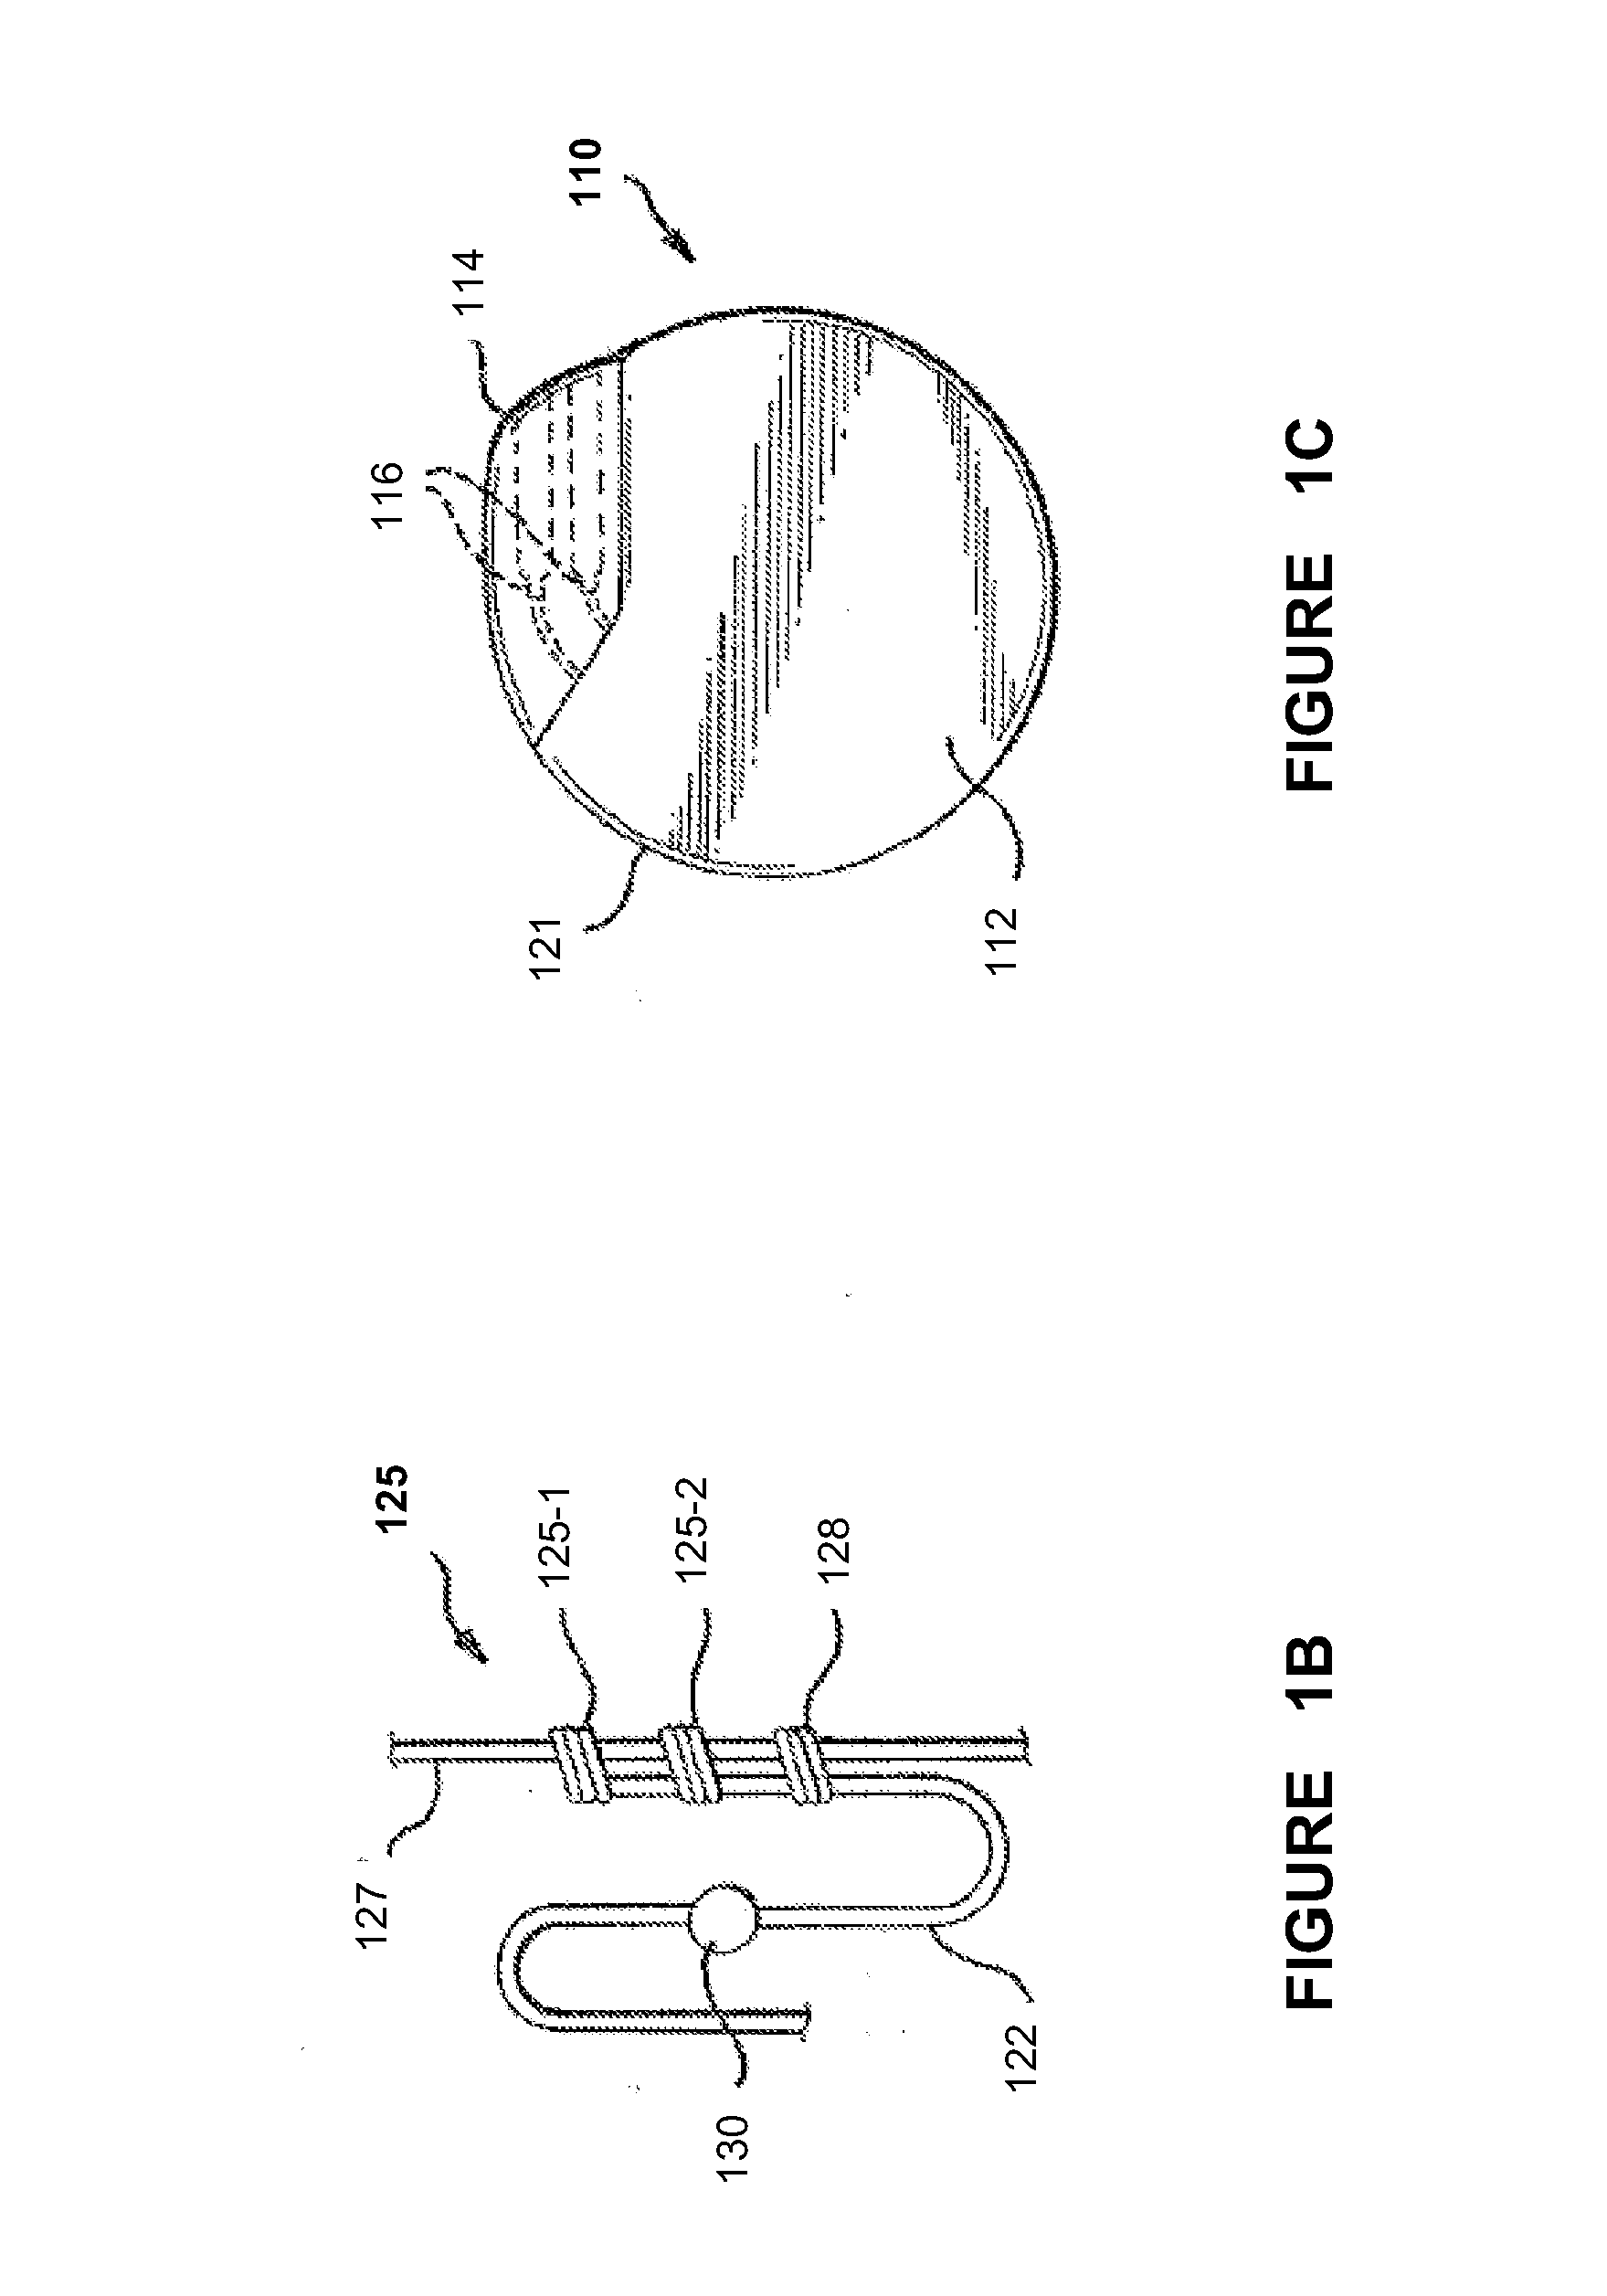 Dynamic lead condition detection for an implantable medical device